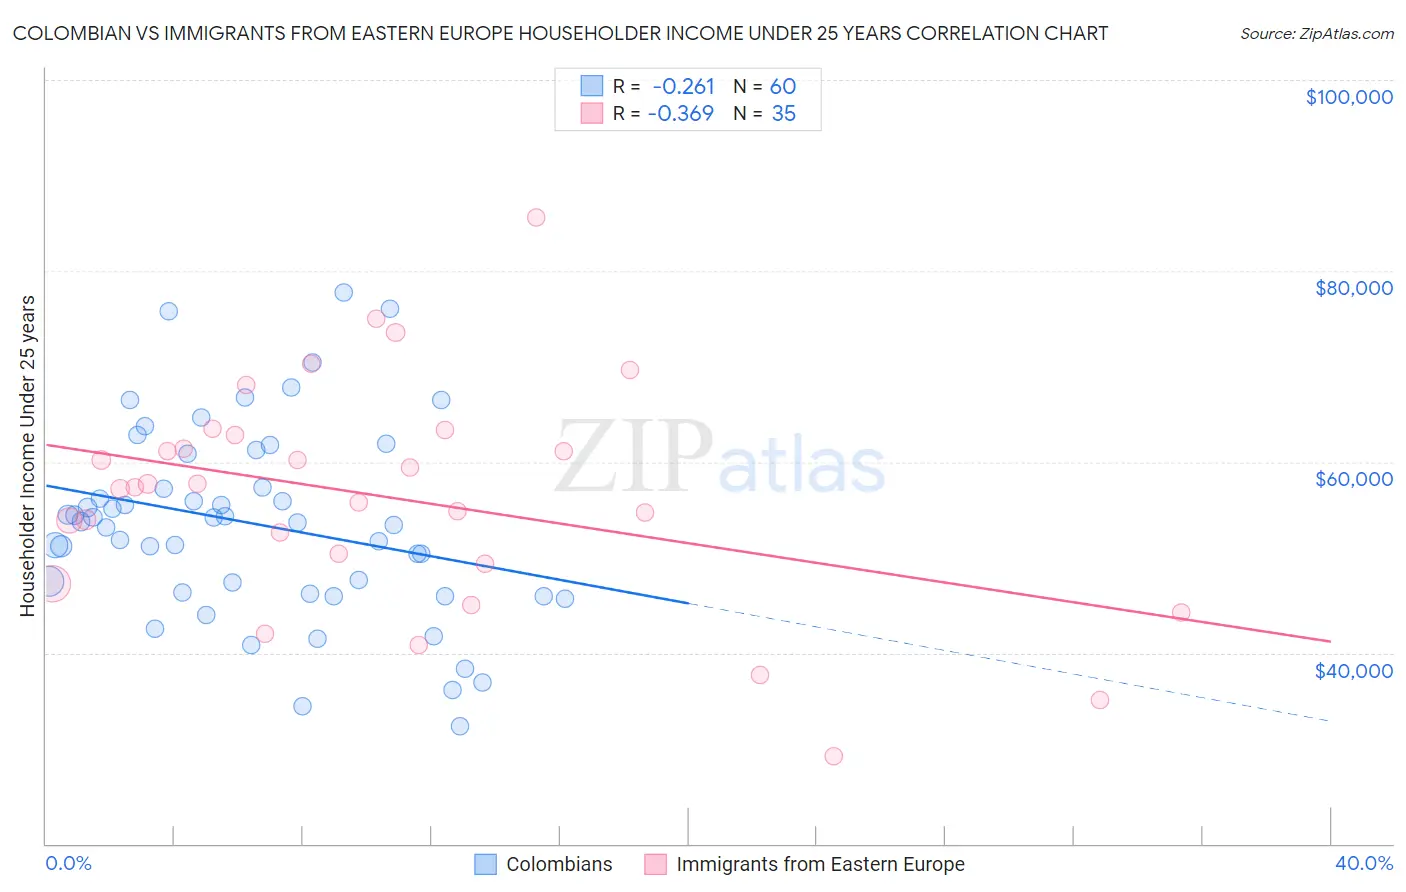 Colombian vs Immigrants from Eastern Europe Householder Income Under 25 years